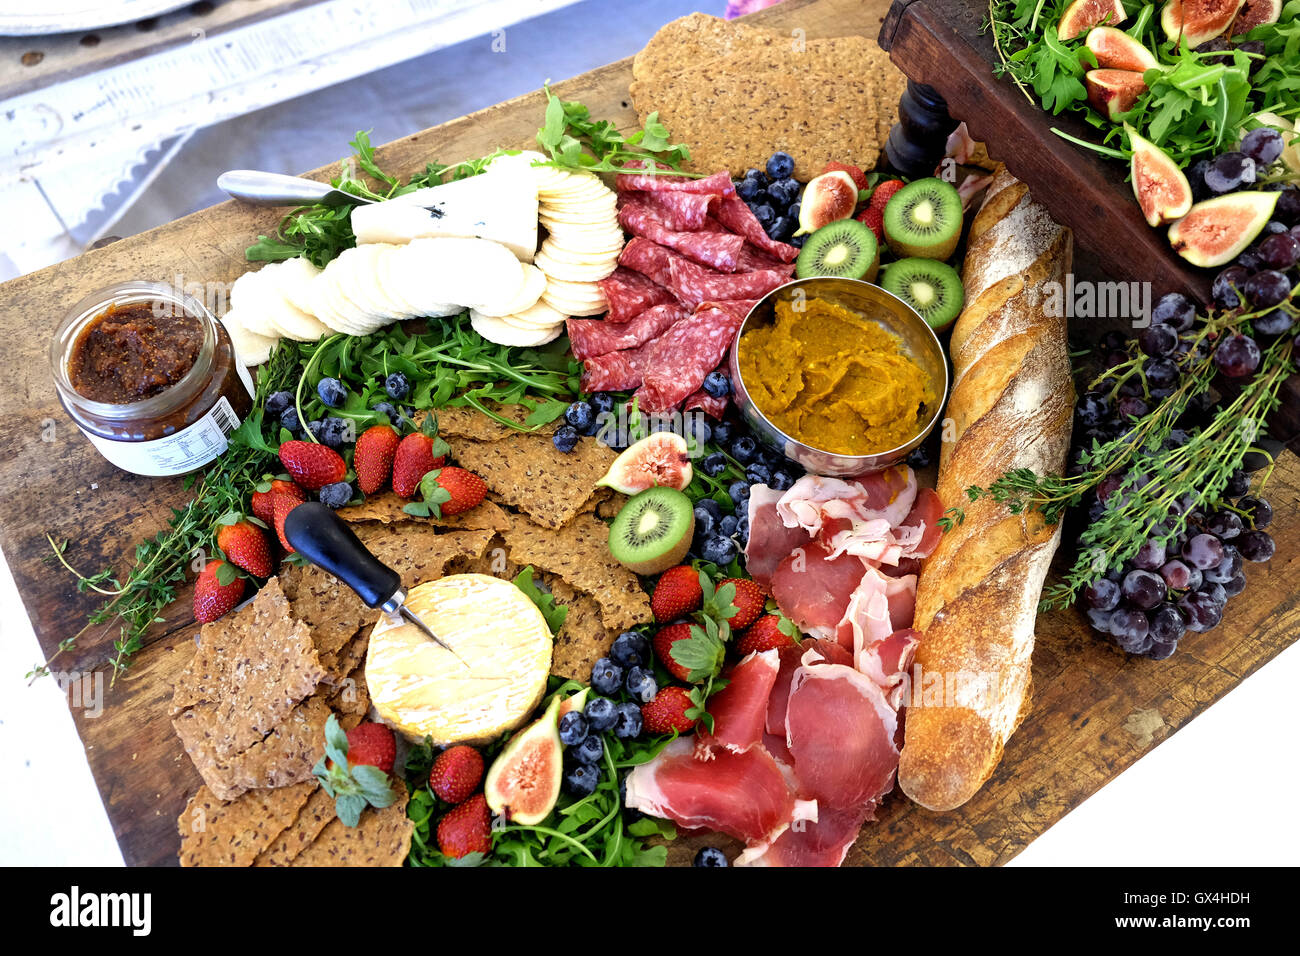 A platter of healthy food is offered at a boutique opening party Stock Photo